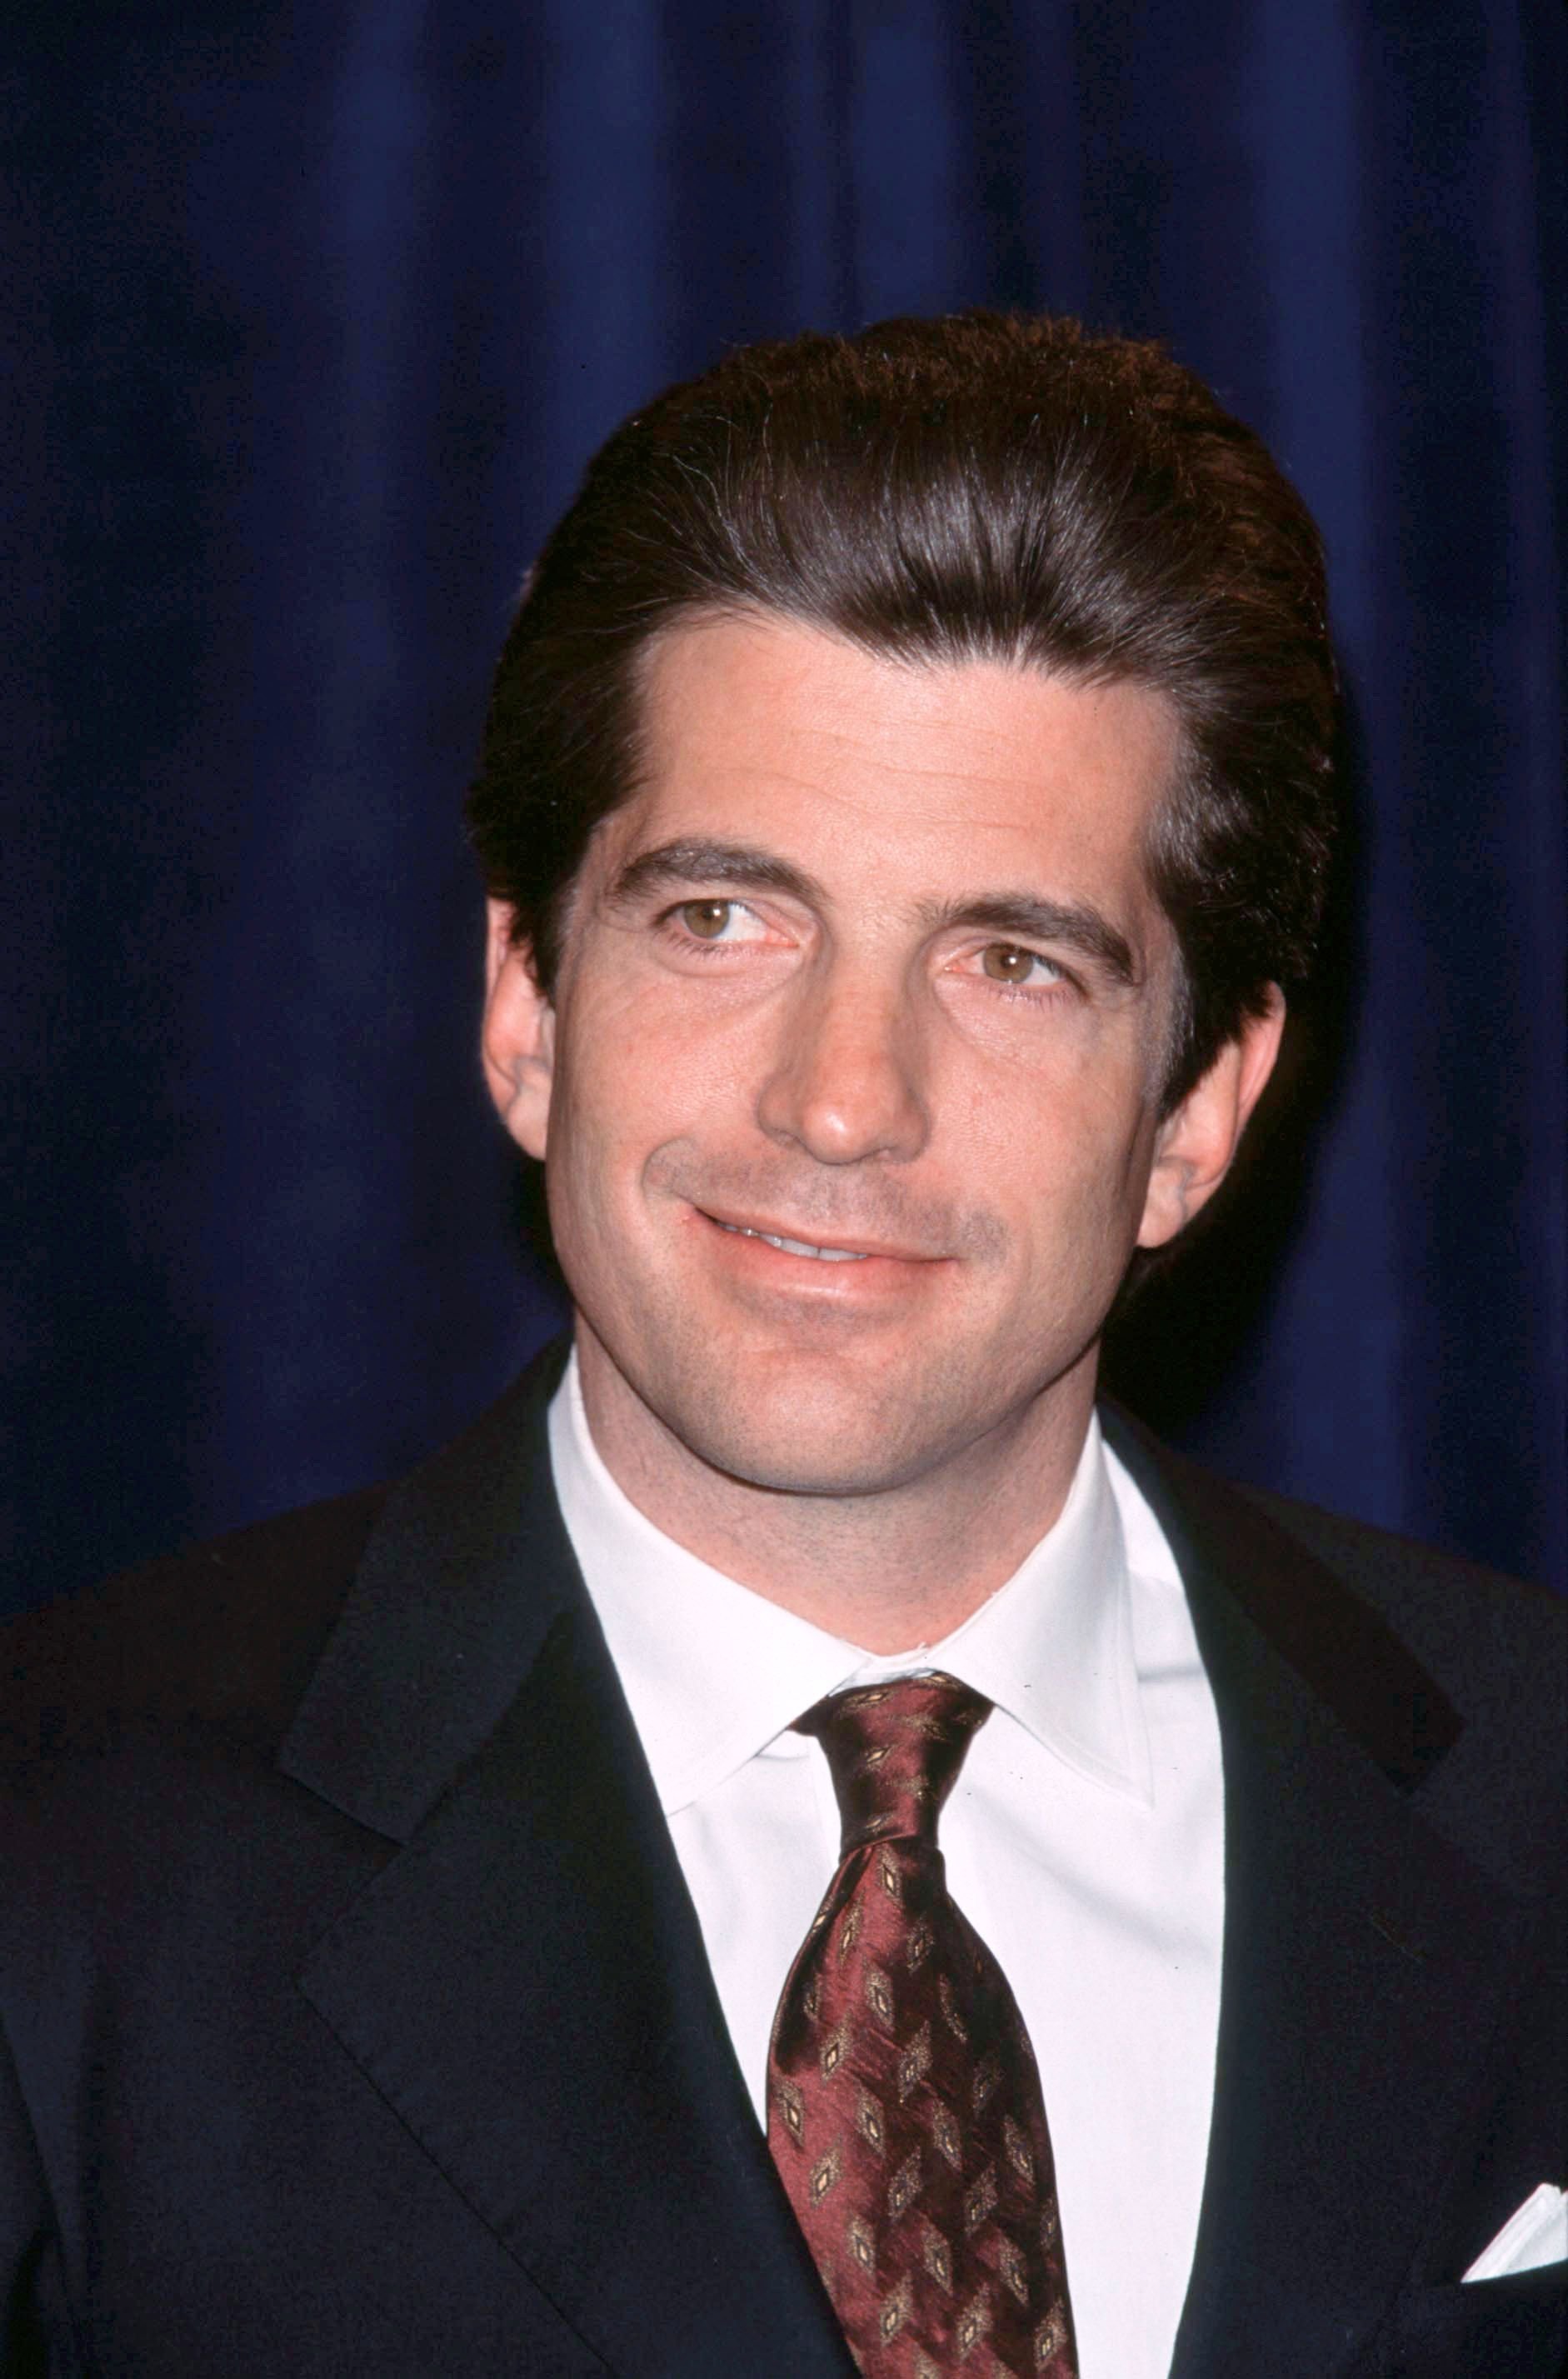 John F. Kennedy Jr. announces the Endowed Jackie Robinson Scholarship, at the Jackie Robinson Foundation Dinner on March 8, 1999 | Photo: Evan Agostini/Getty Images